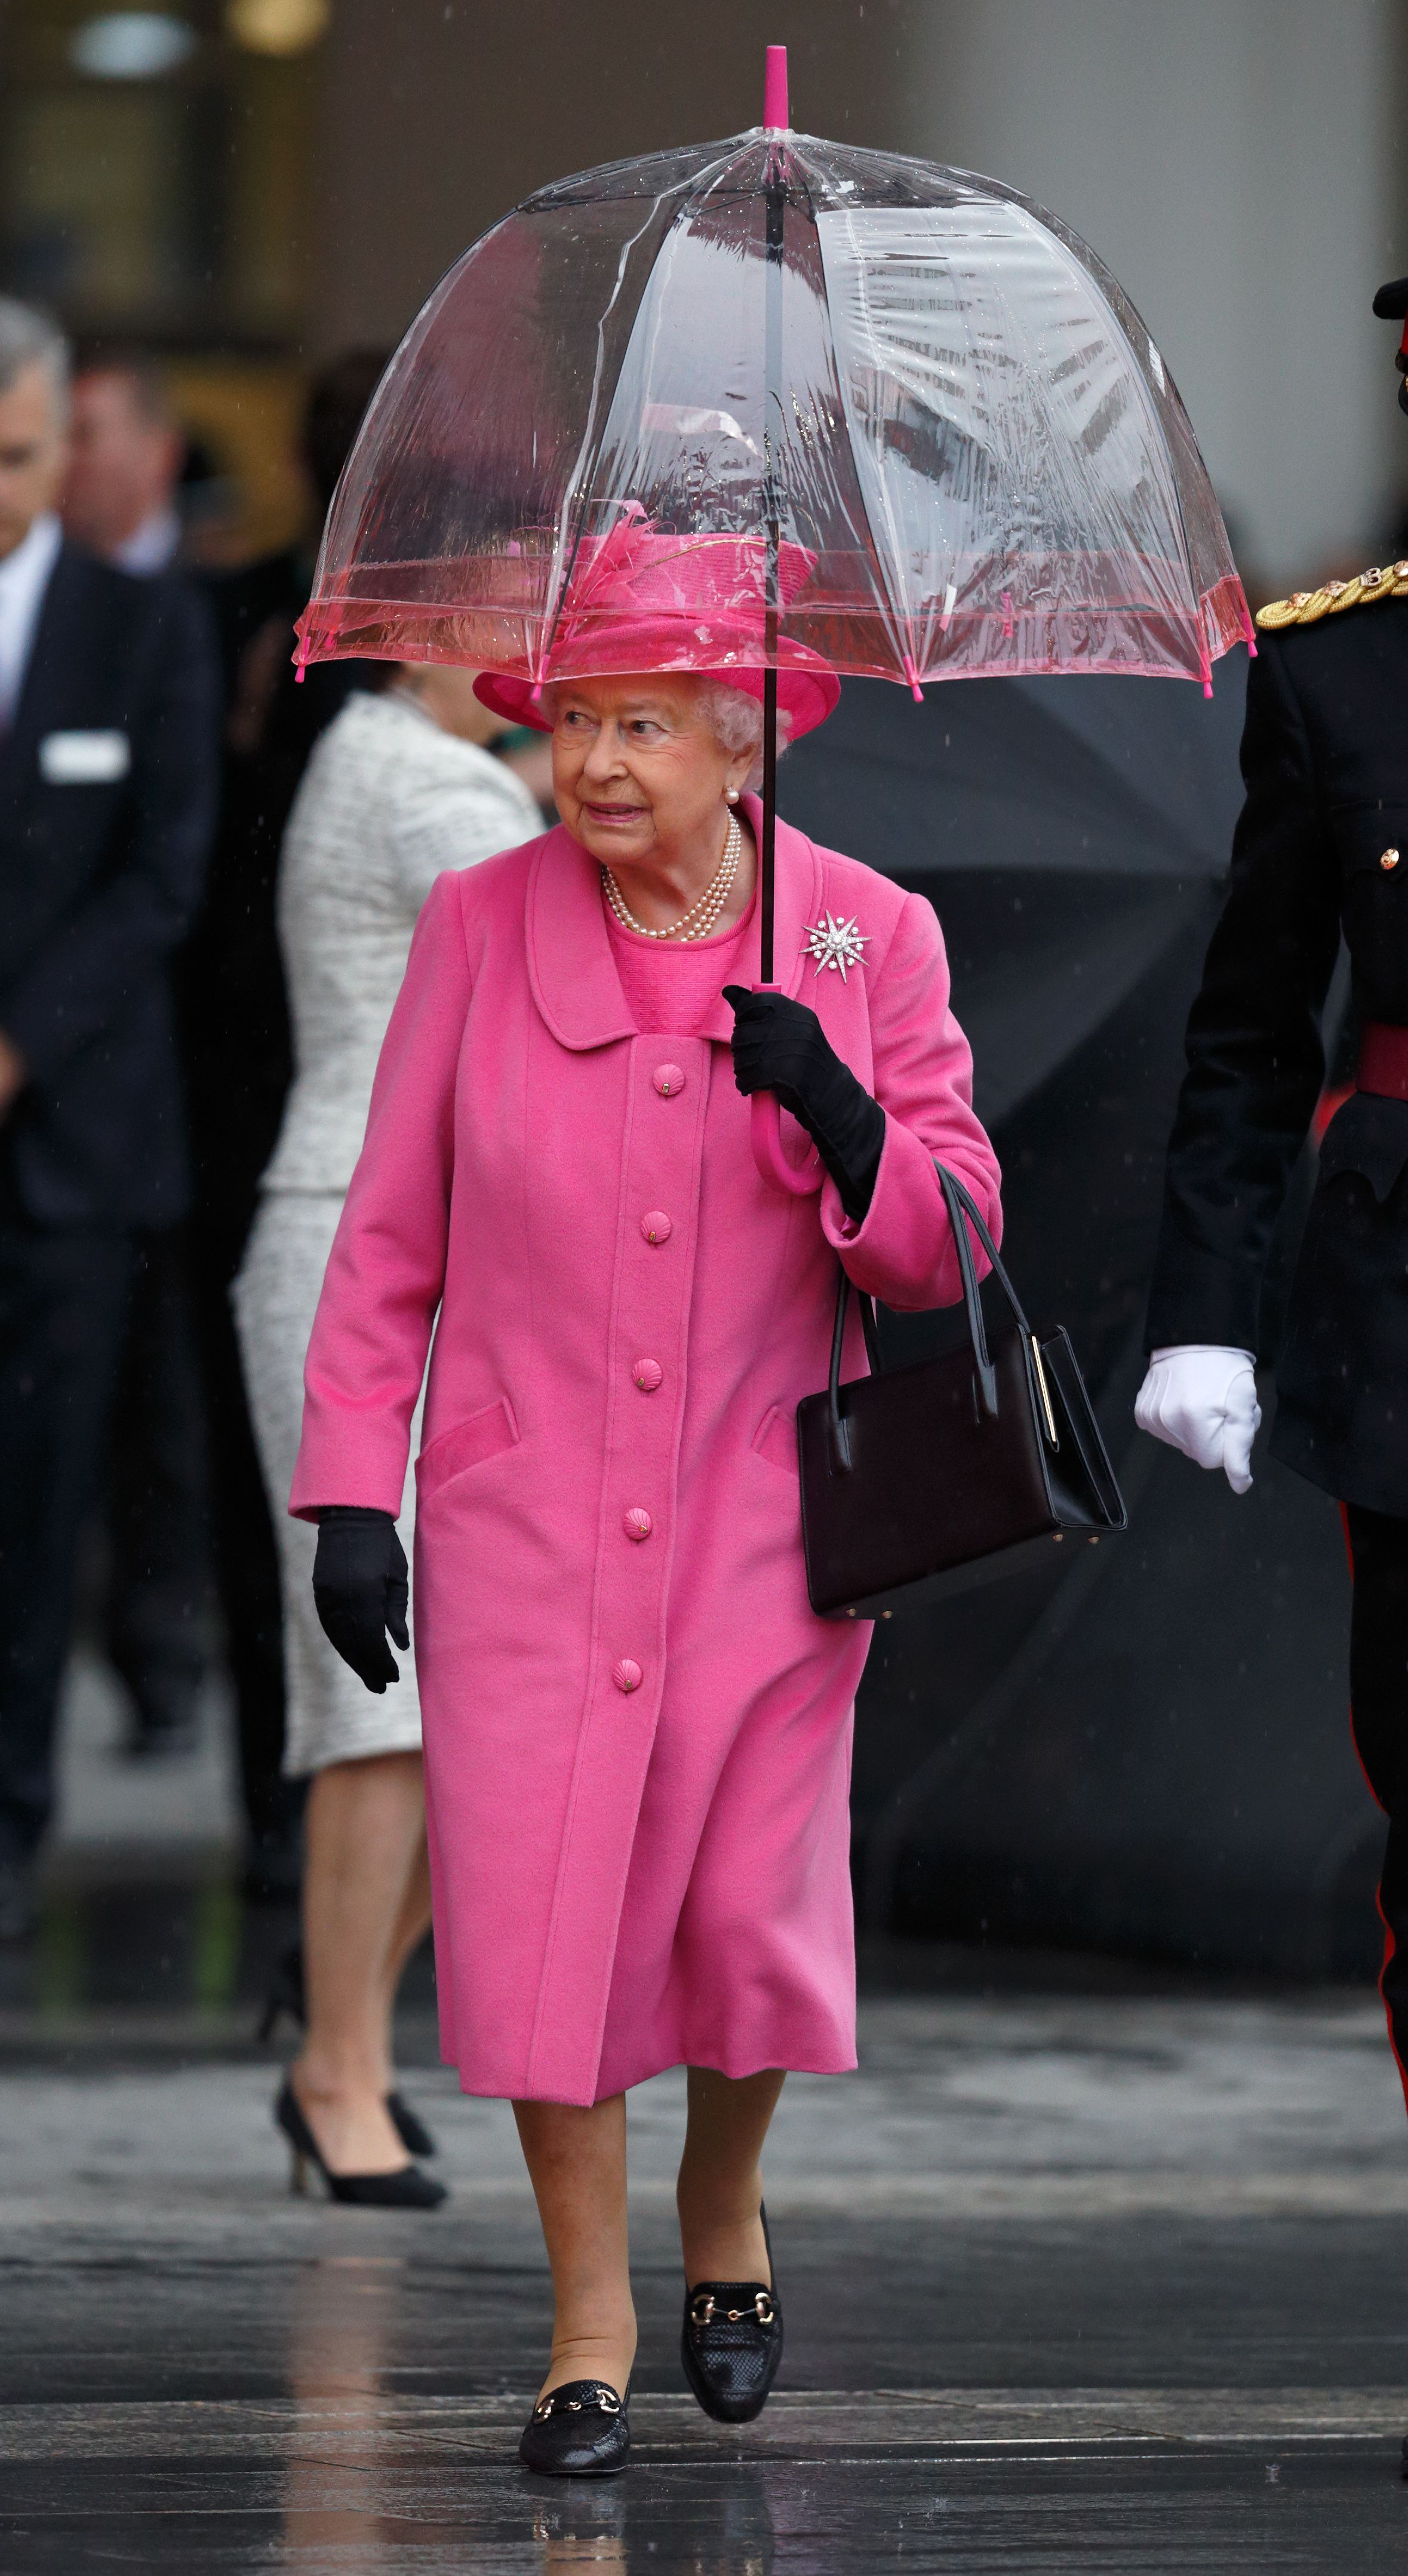 70 Photos of the Royal Family Wearing Pink - Queen Elizabeth, Princess  Diana, Kate Middleton in Pink